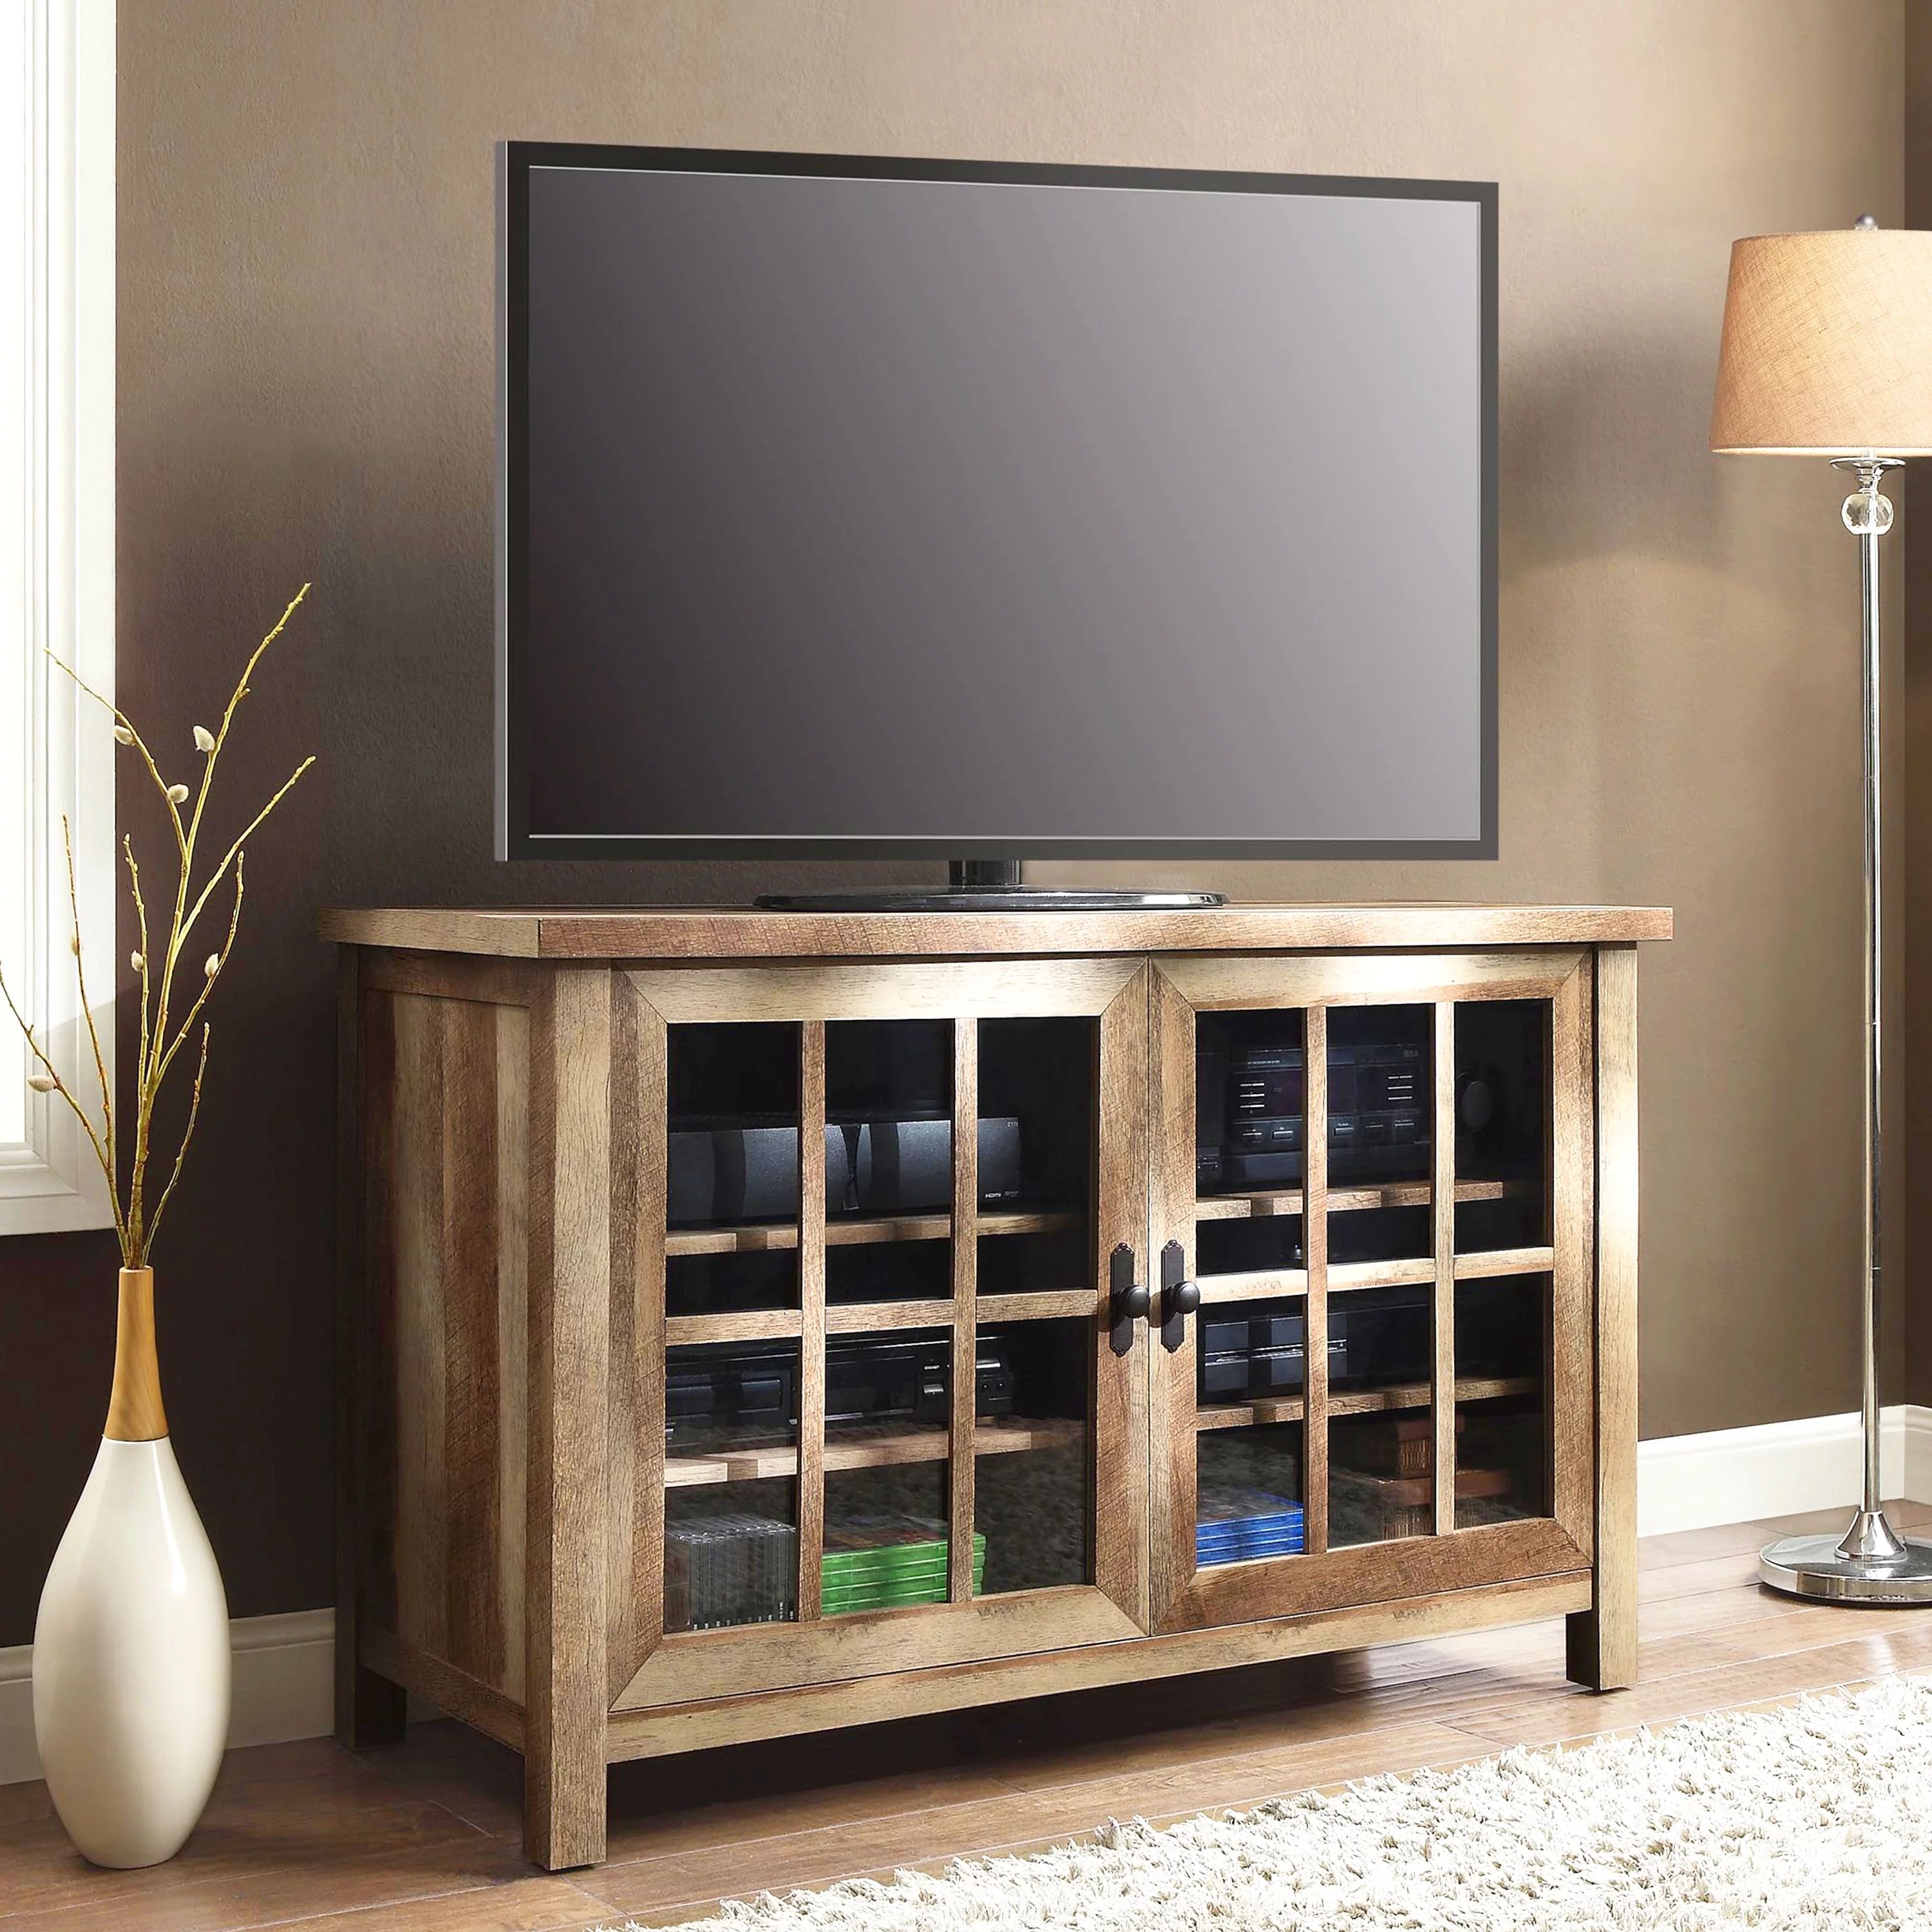 Better Homes & Gardens Oxford Square TV Stand for TVs up to 55", Rustic Brown | Walmart (US)